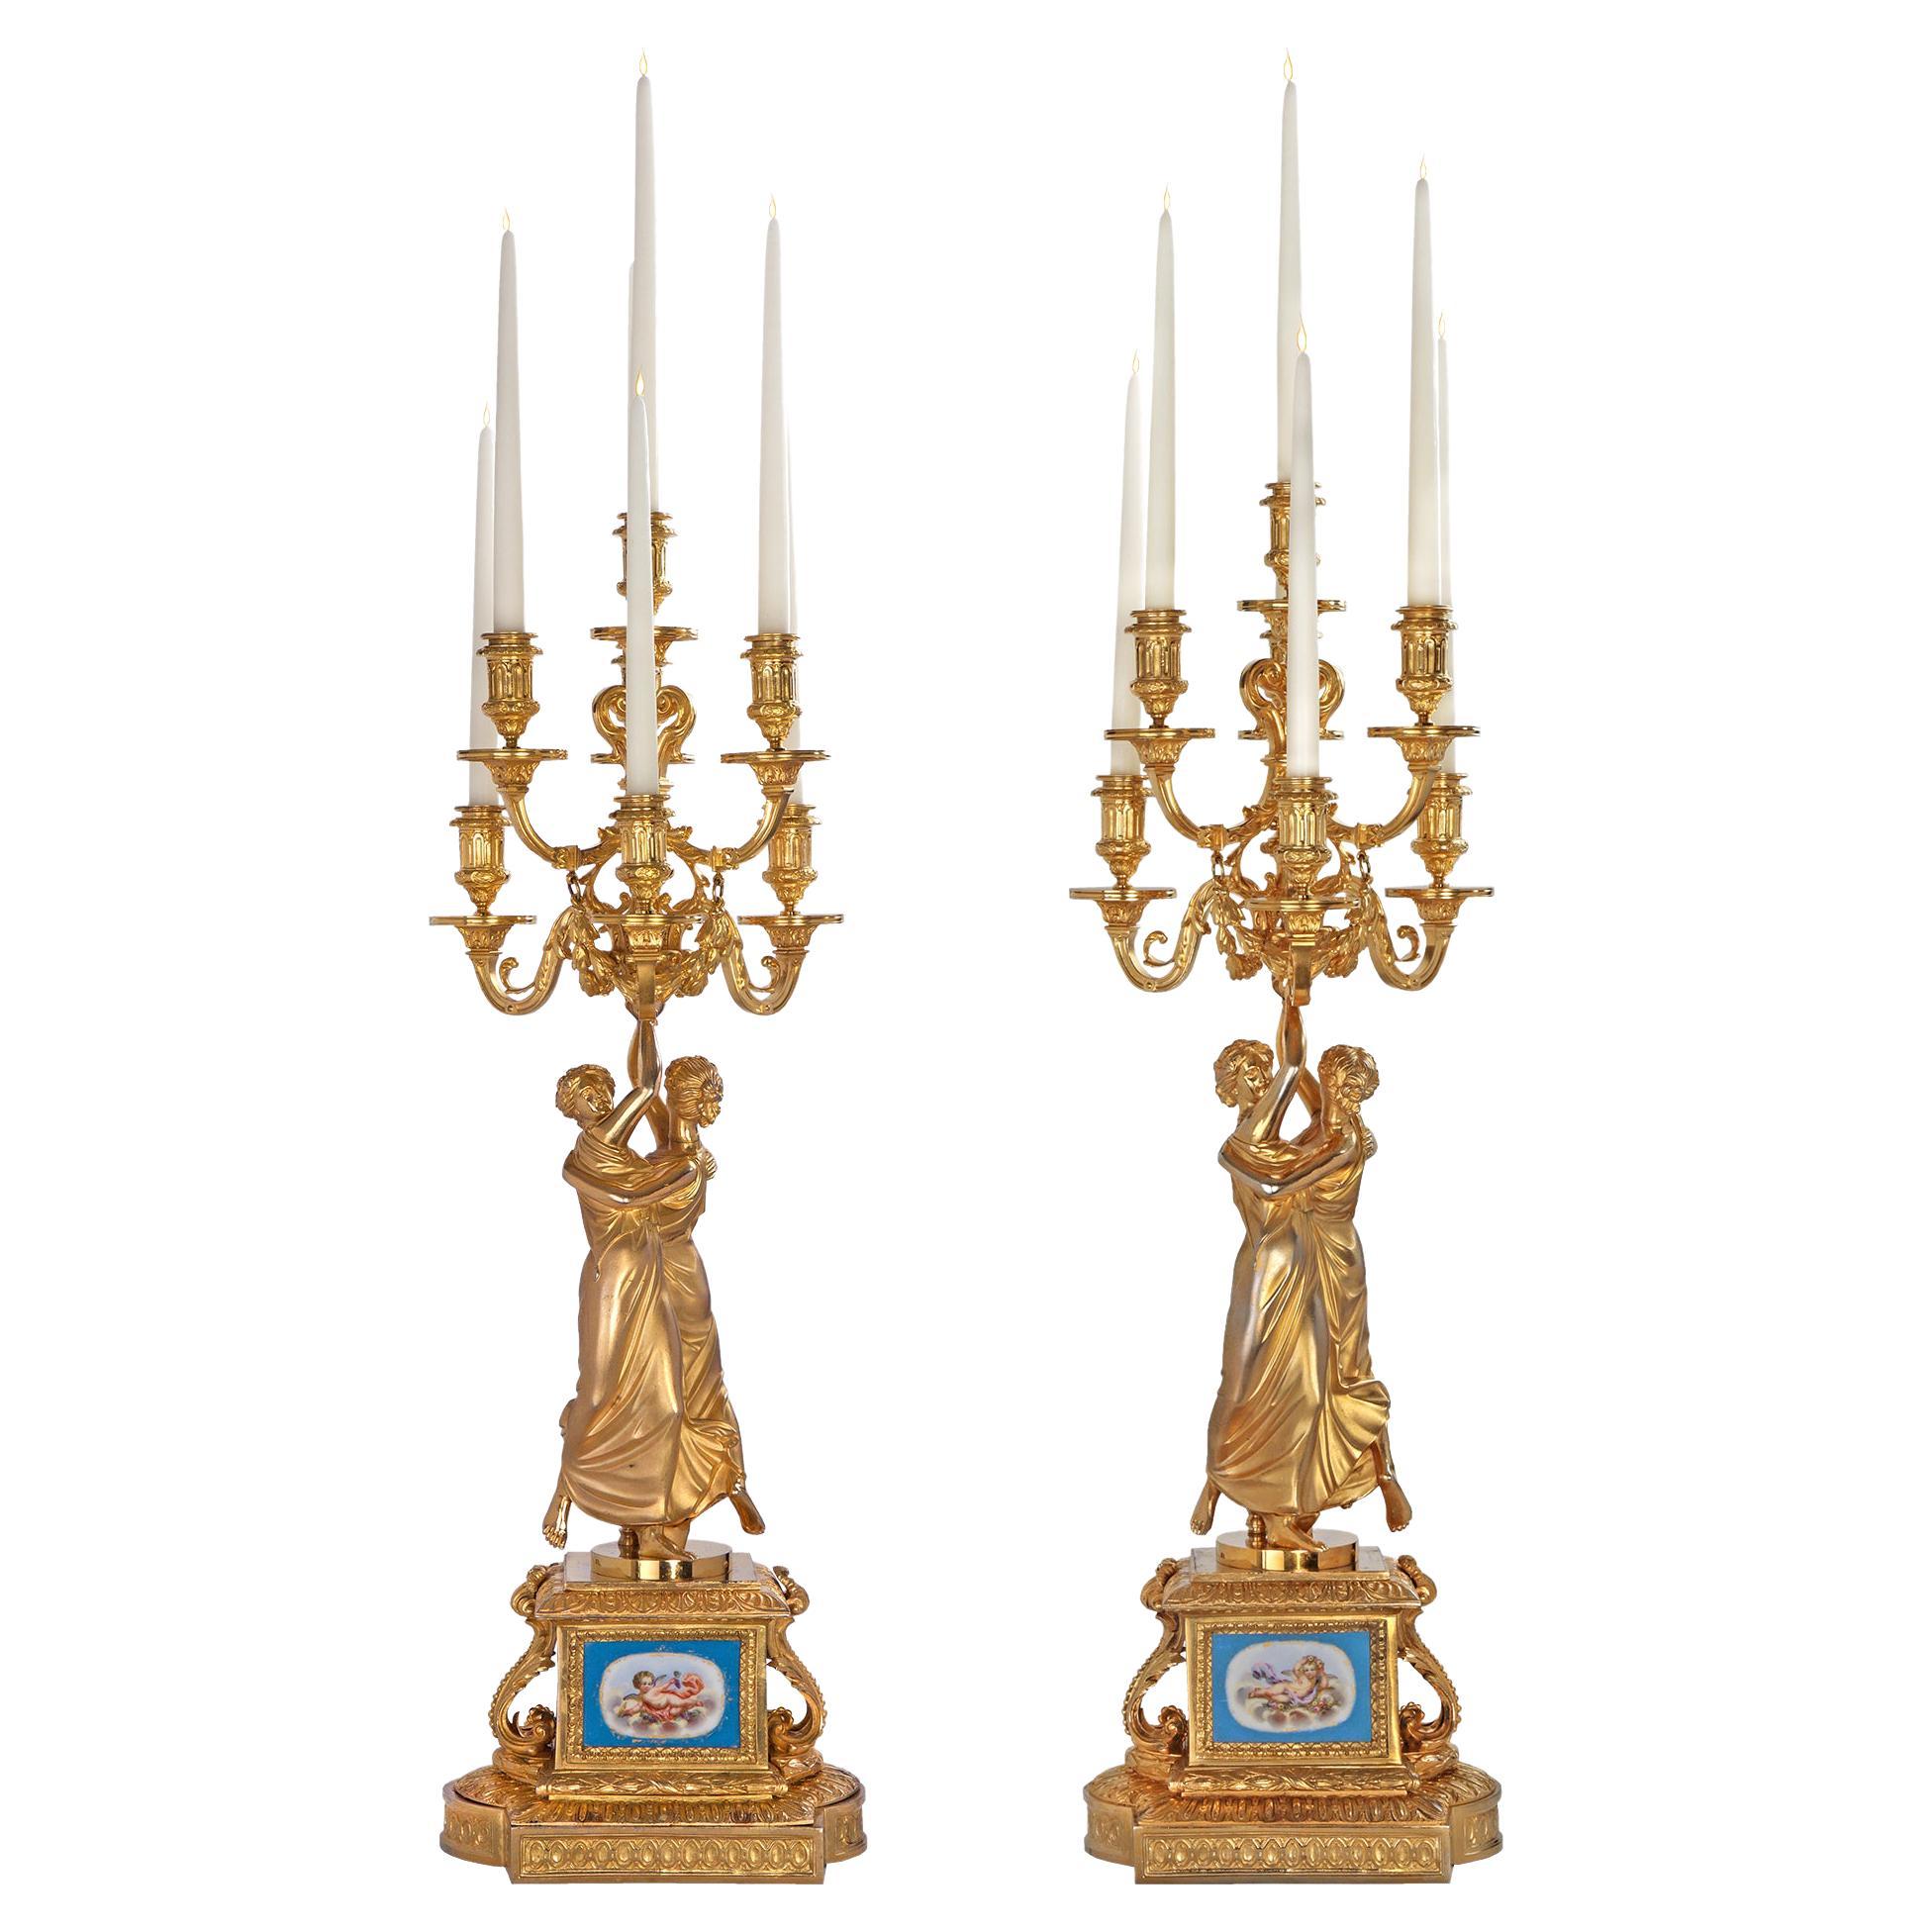 French 19th Century Louis XVI Style Belle Époque Period Candelabras For Sale